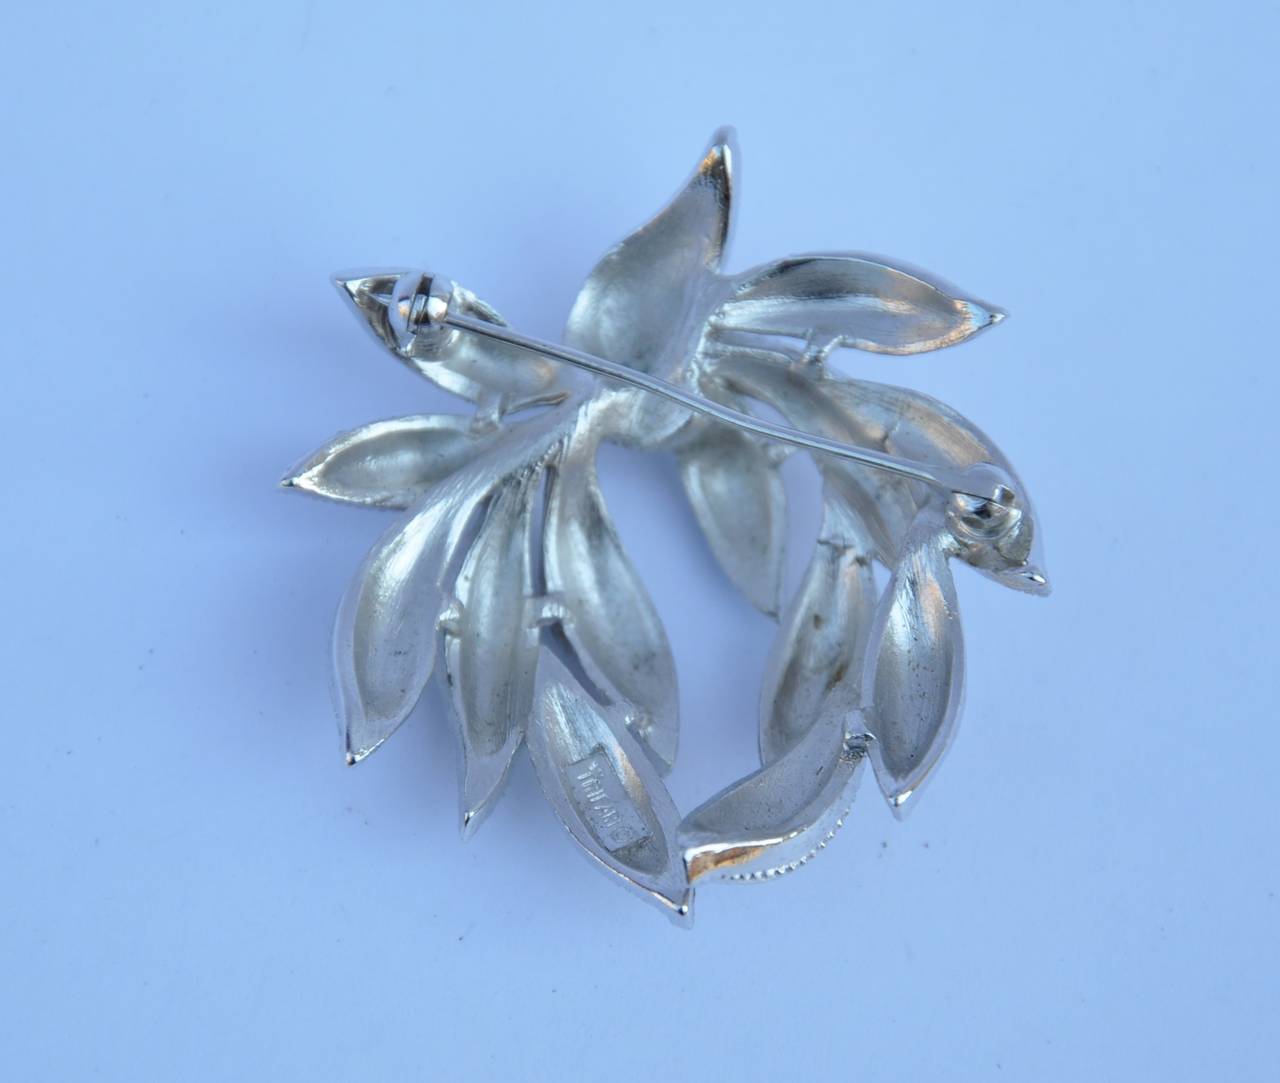 Trifari silver tone "wreath" brooch is signed on the backside and measures 1 3/4 in width, length is 1 3/4", depth is 1/4".